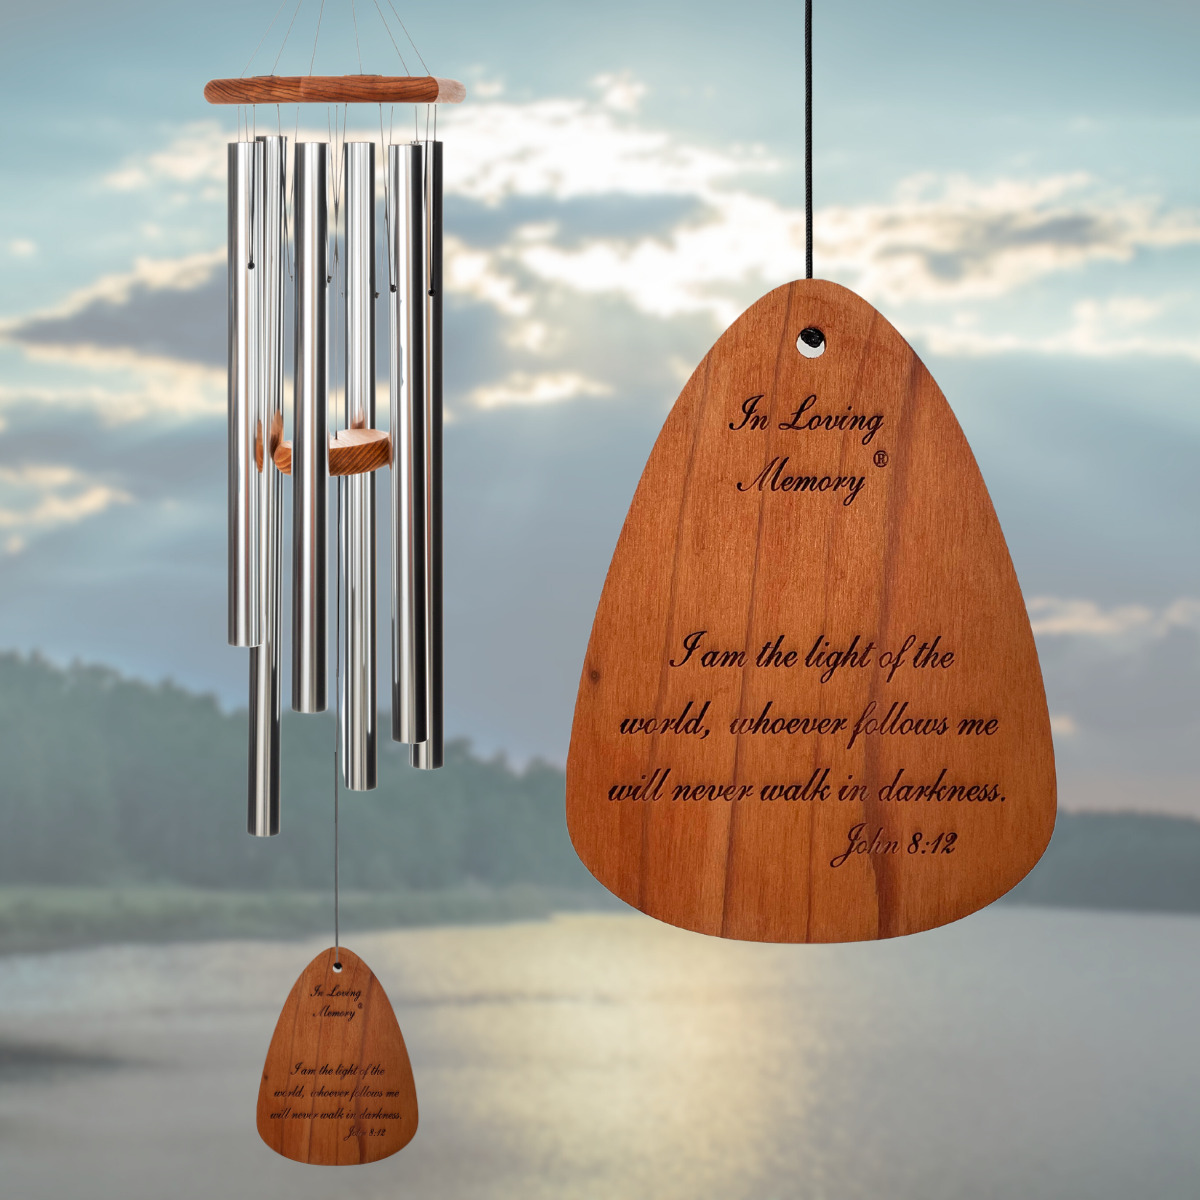 In Loving Memory 42 Inch Wind Chime - I am the Light of the world - Silver